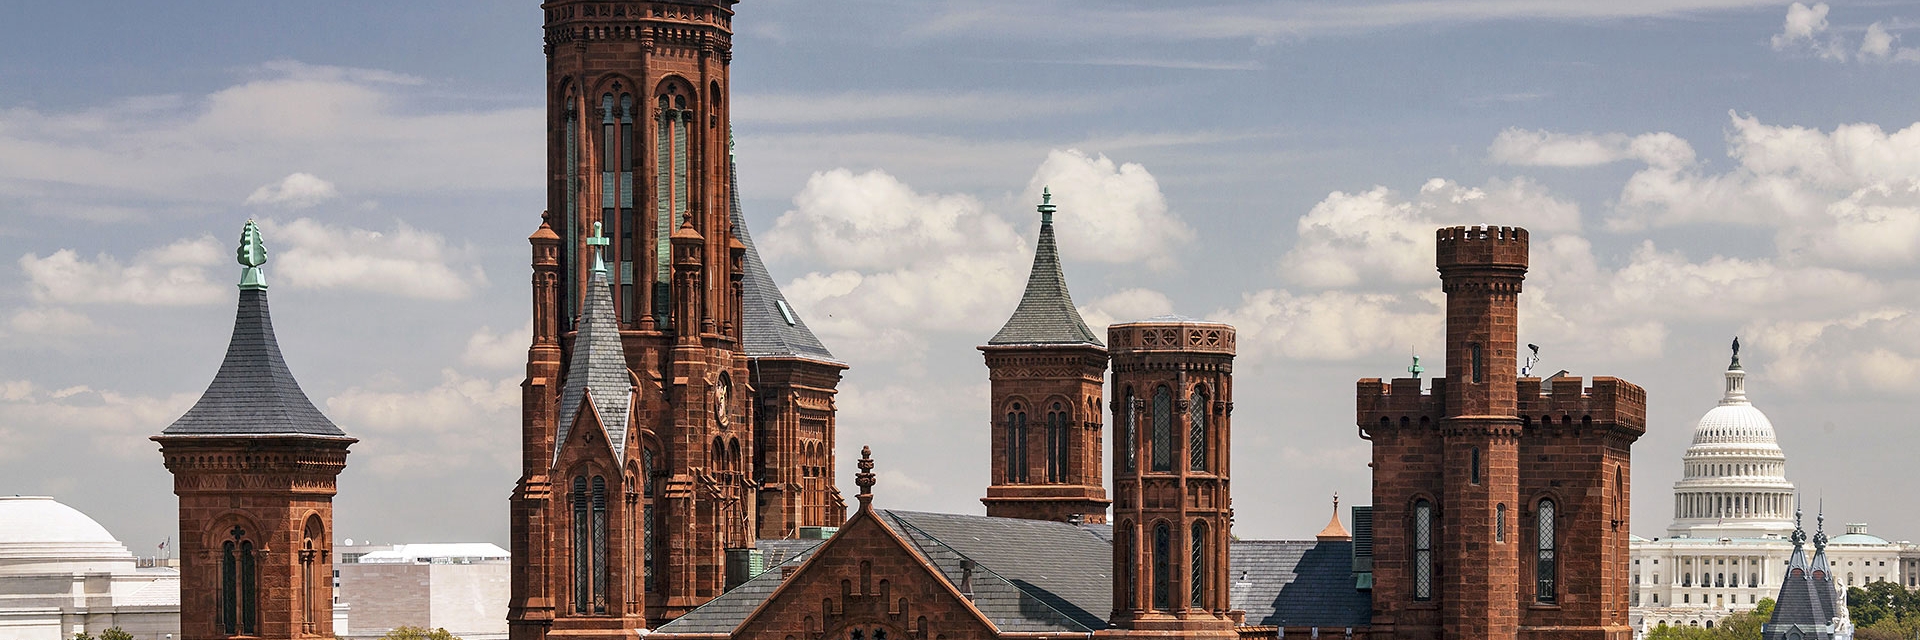 Image of the Smithsonian Institution Castle with the U.S. Capitol in the background